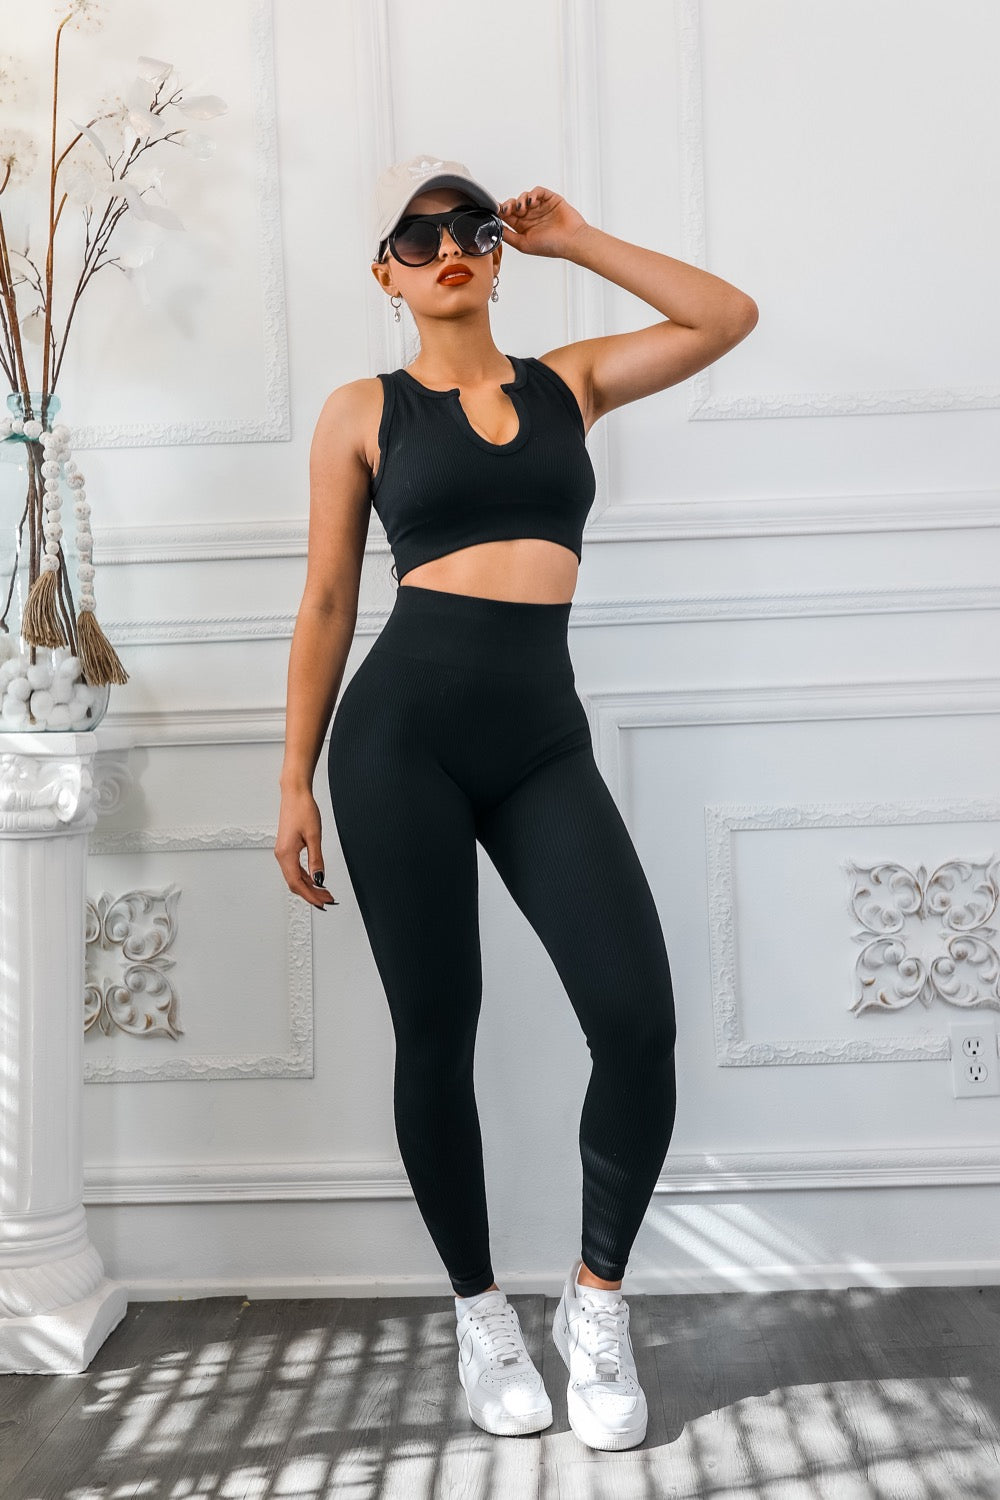 Next Level Ribbed Snatched Active Wear Pant Set | High Quality & Contouring Fabric